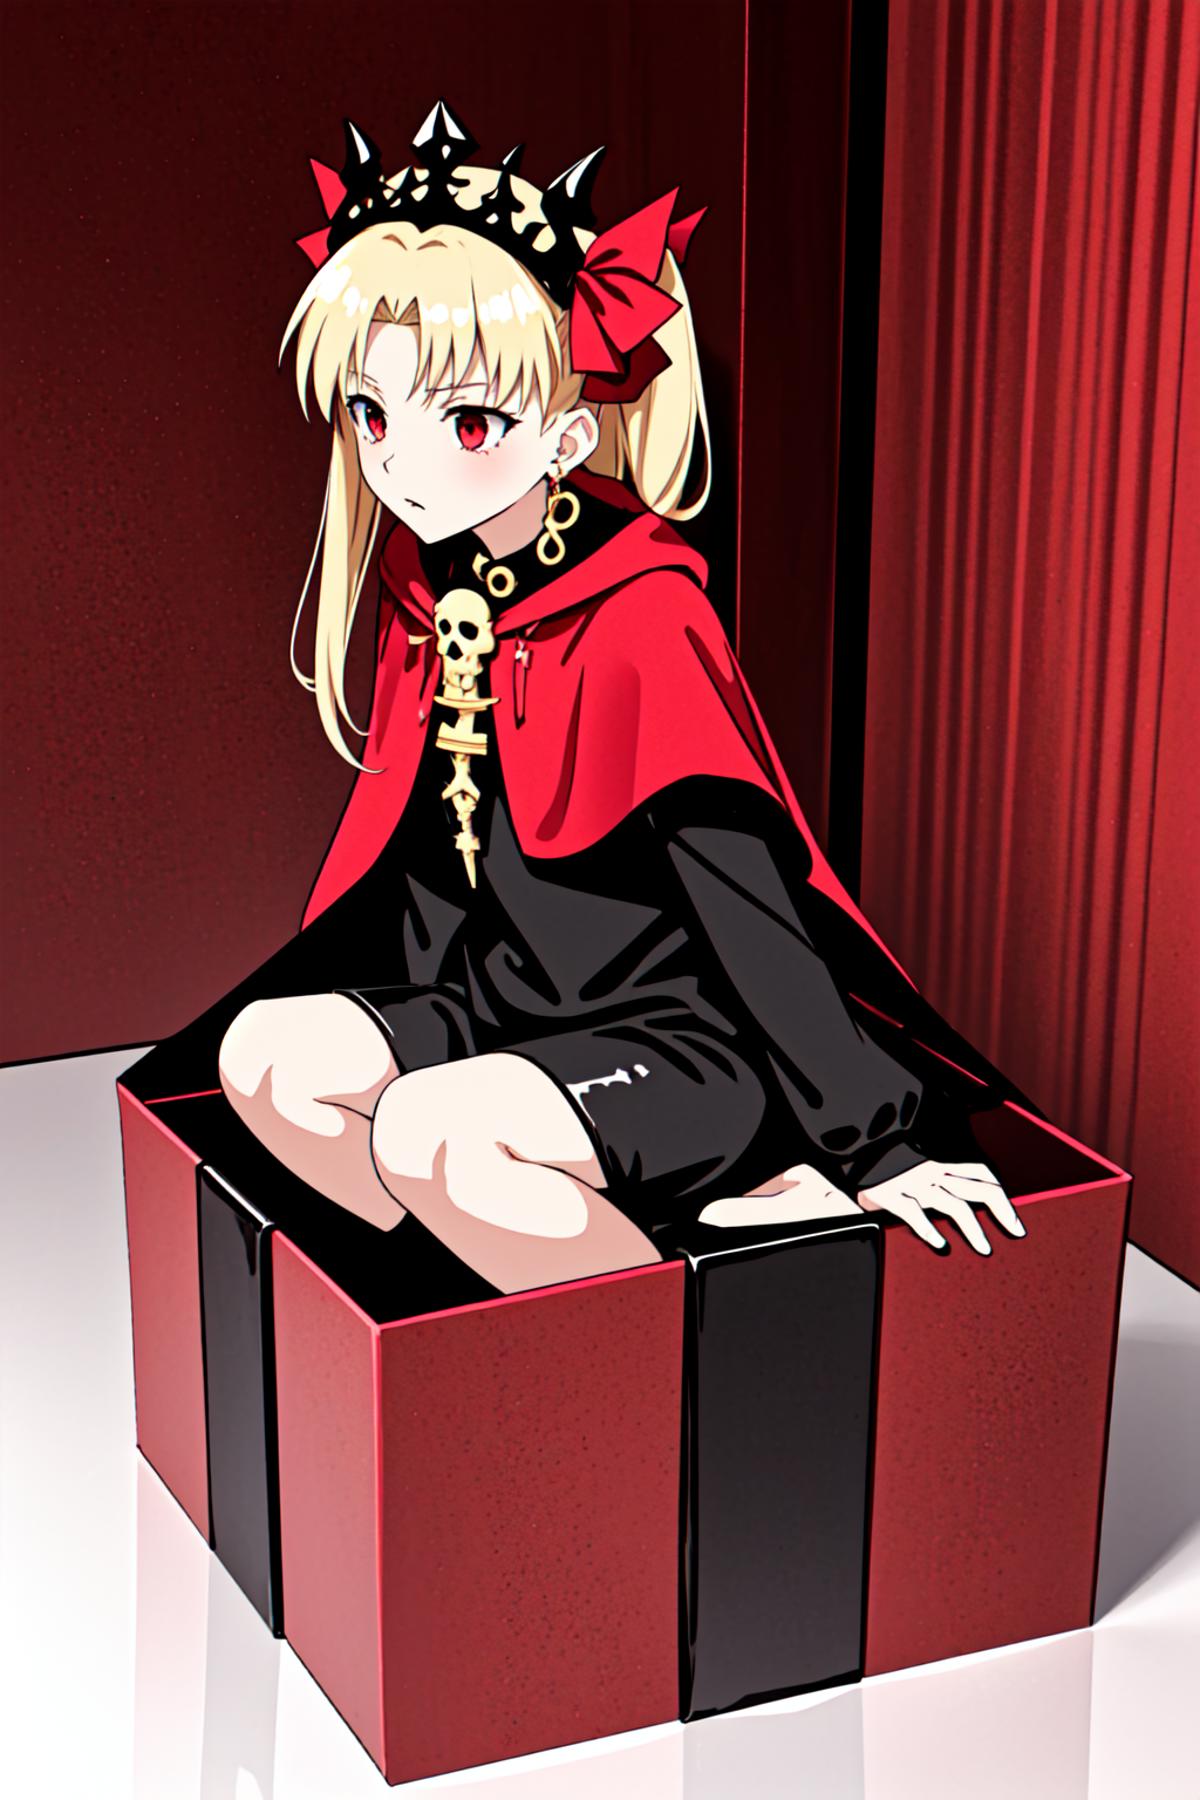 Ereshkigal (6 Outfits) | Fate/Grand Order image by yomama123556778